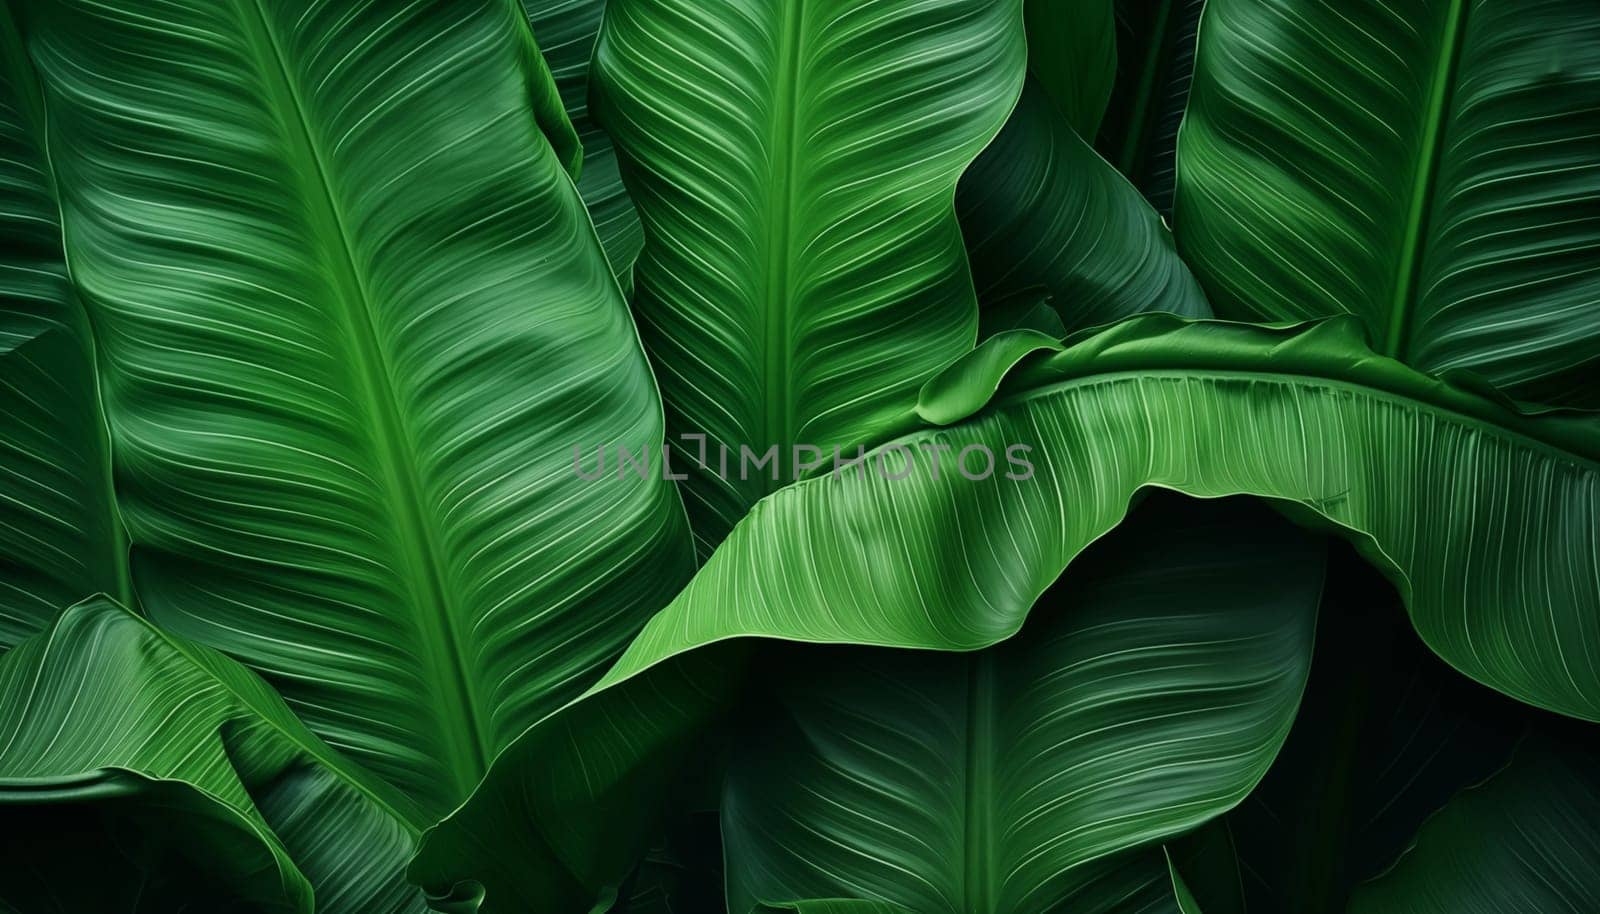 Abstract green leaf texture nature background. High quality illustration